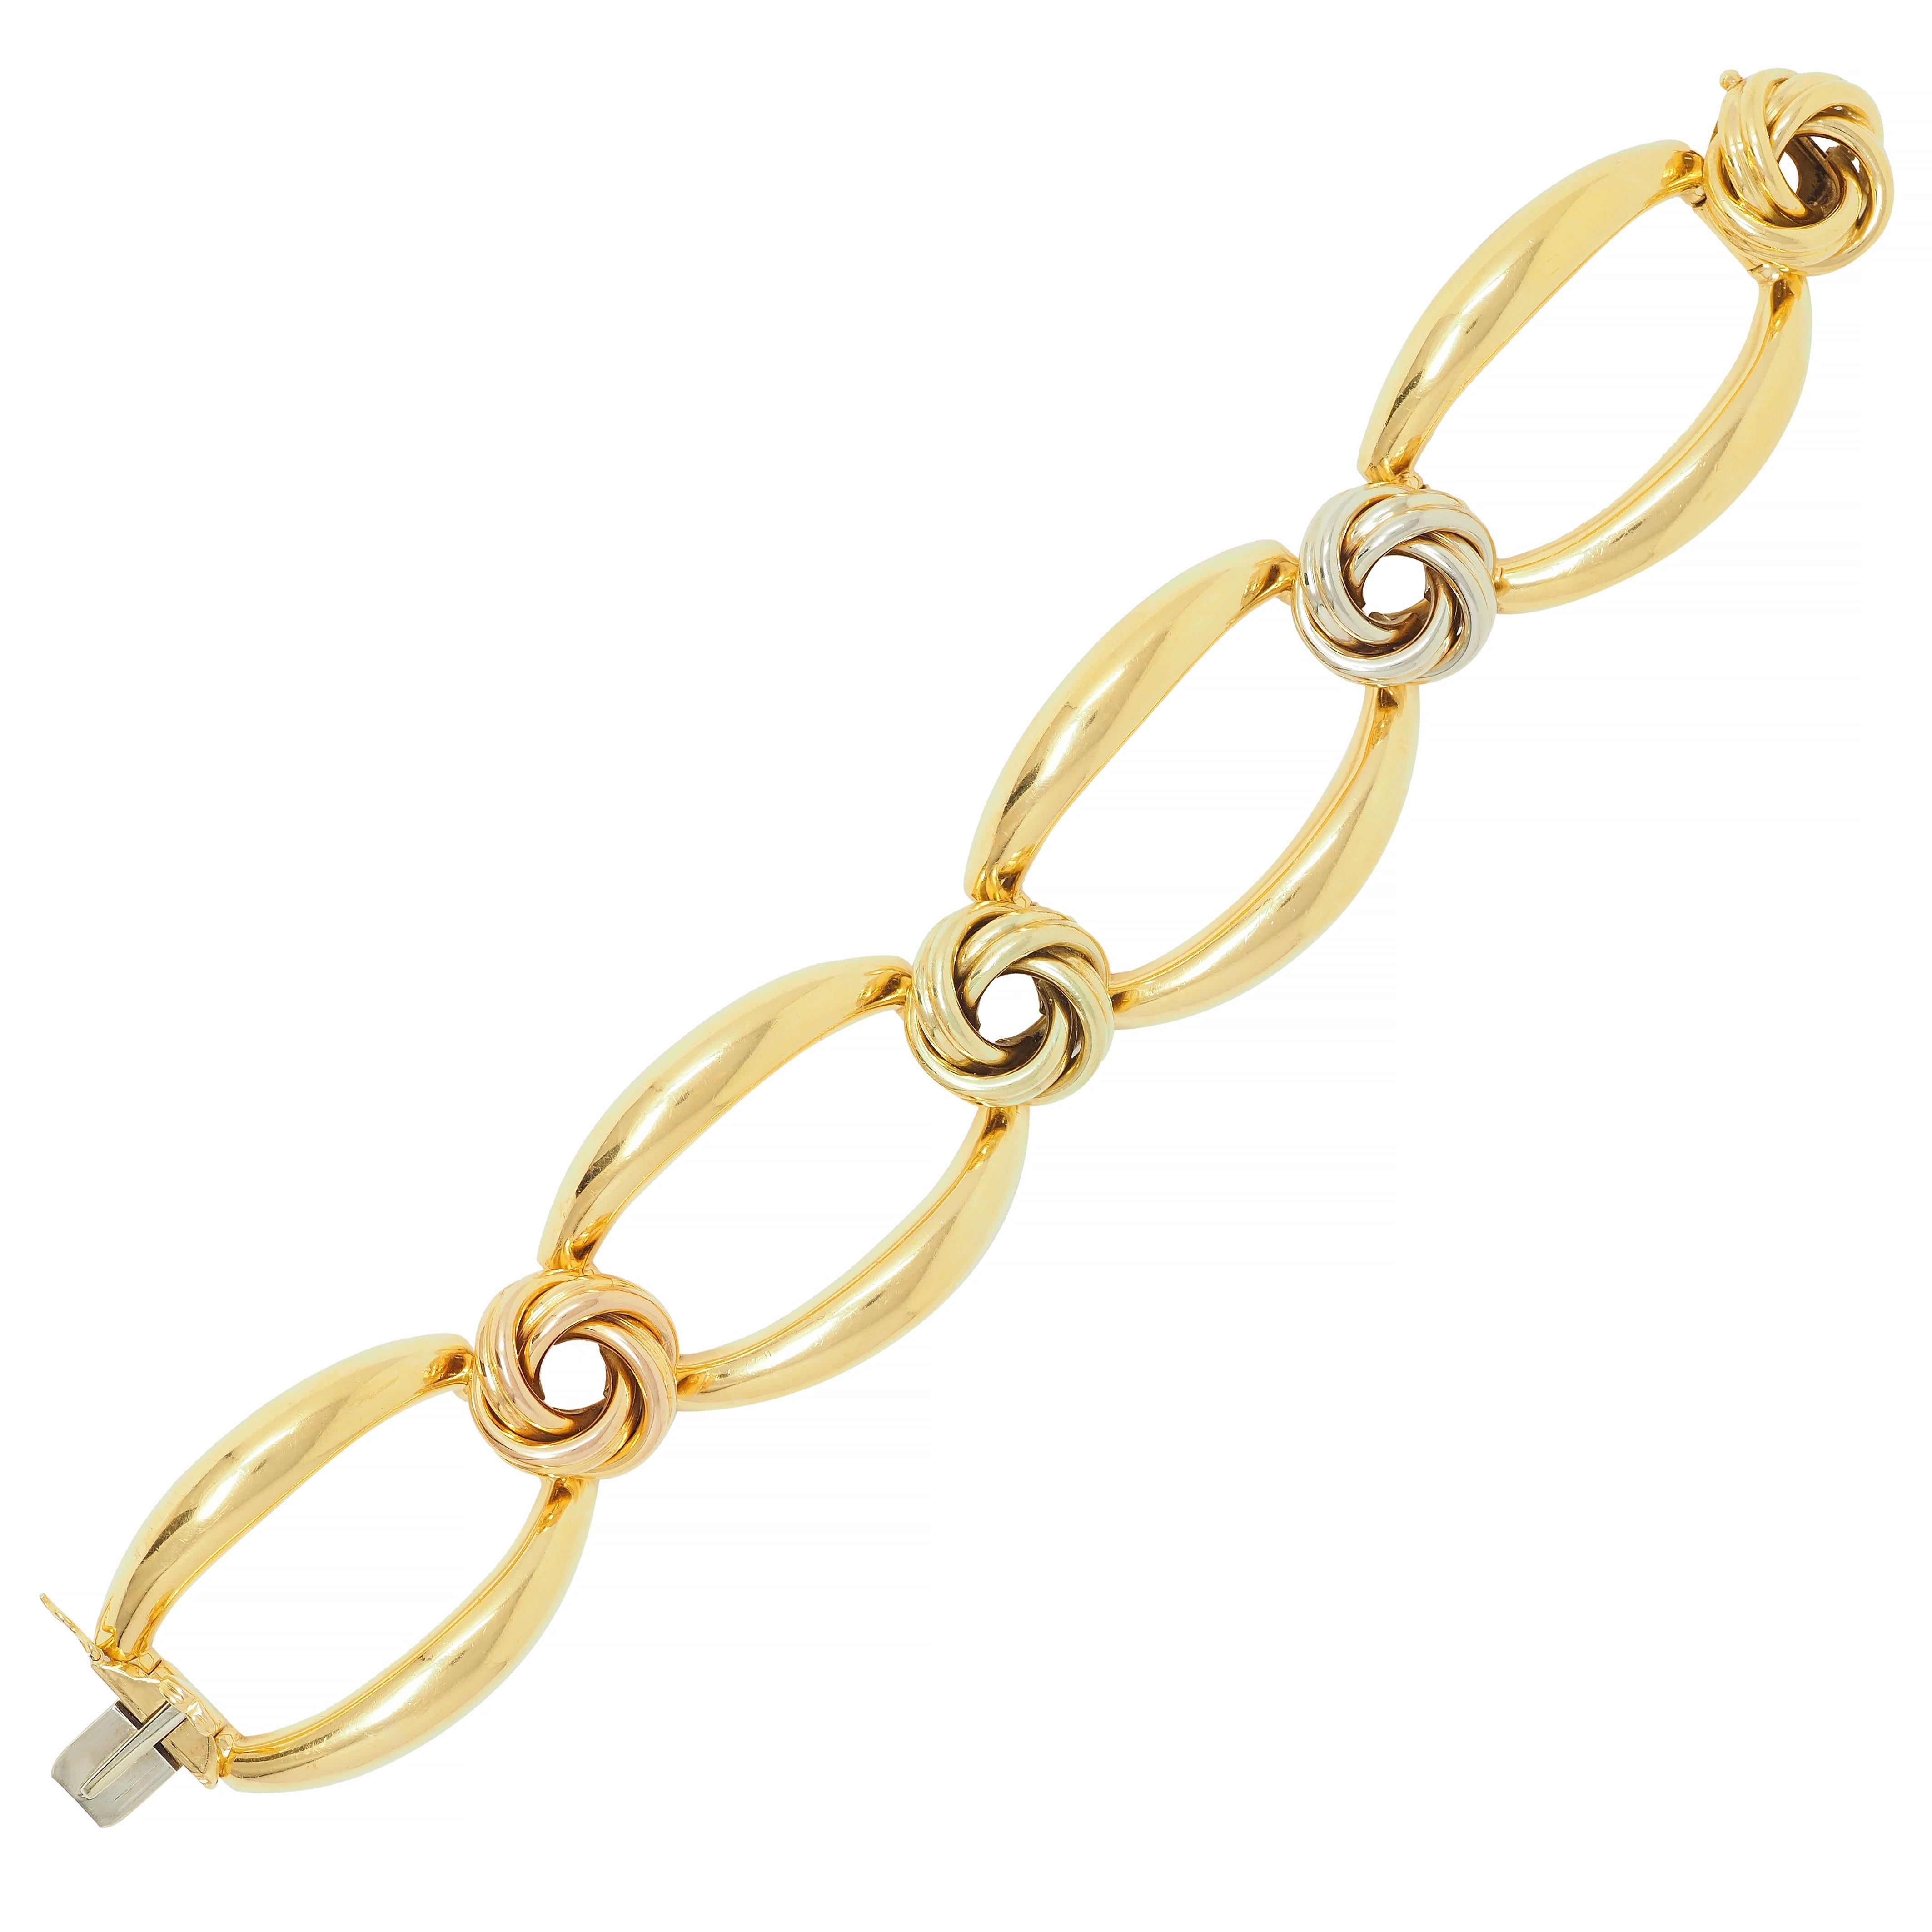 Comprised of large hinged oval-shaped yellow gold links 
Alternating with dimensional twisted knot links 
Yellow, rose, white, and green gold in color
Links are slightly curved for comfort 
Completed by concealed clasp closure
With figure eight